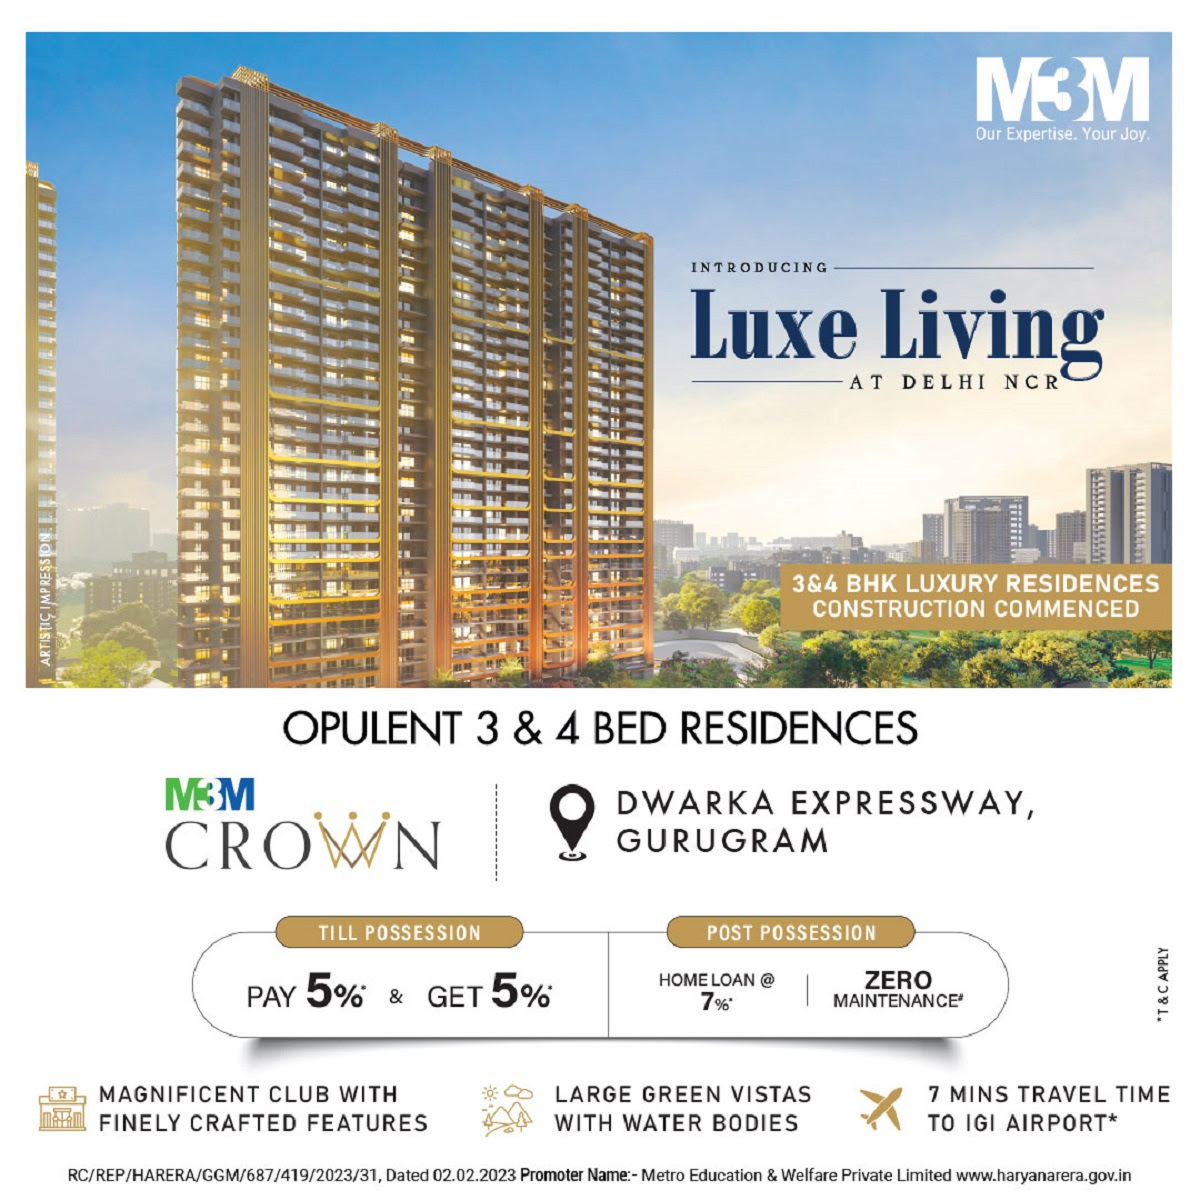 Book 3 & 4 BHK luxury residences construction commenced at M3M Crown, Sector 111, Gurgaon Update